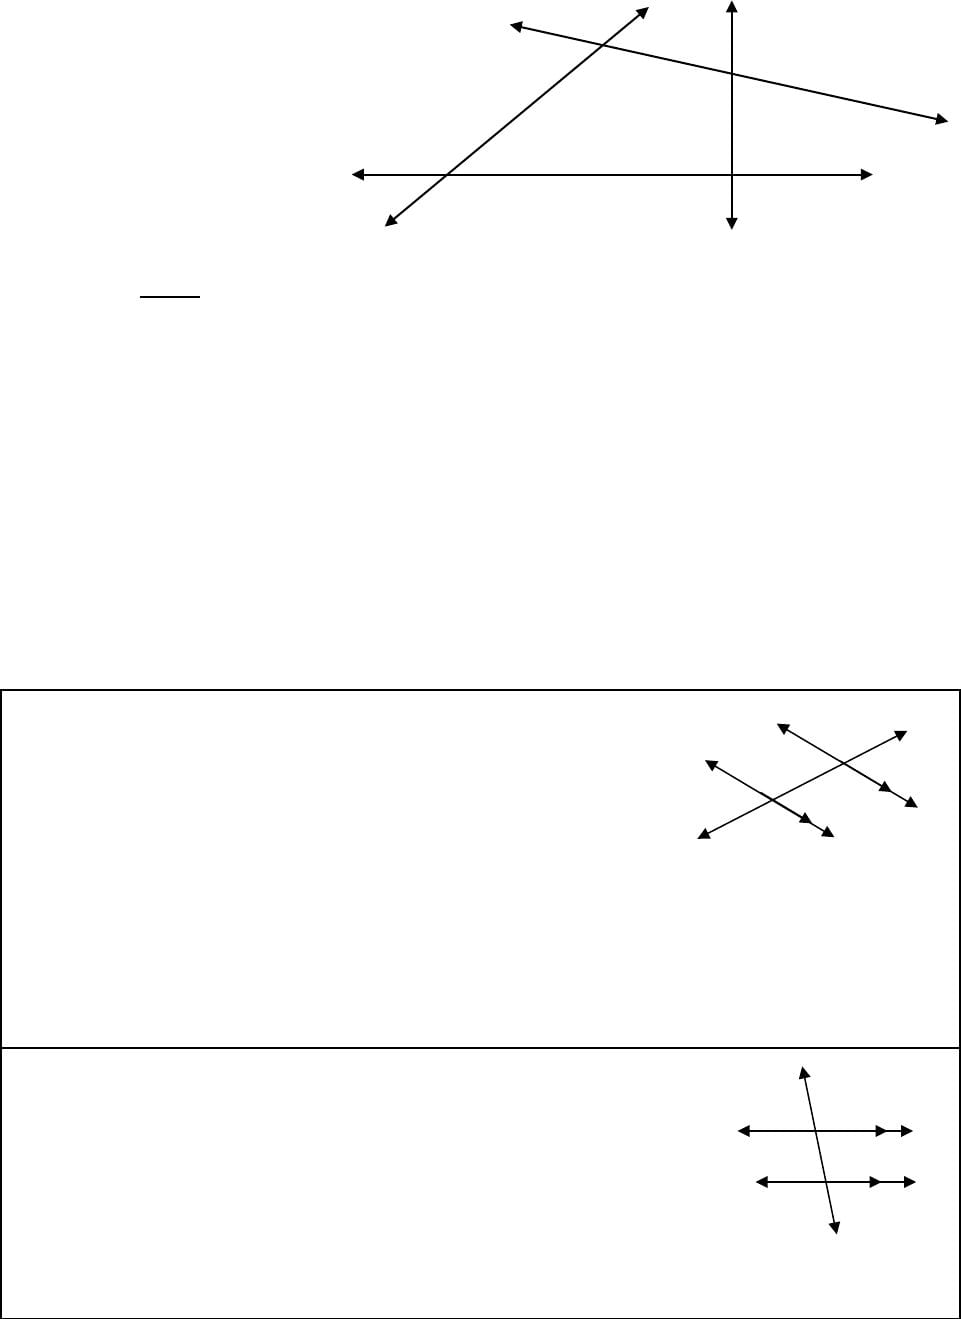 Worksheet On Parallel Lines And Onweb Viewch3 Sections 3 And 4 Within Special Angle Pairs Worksheet